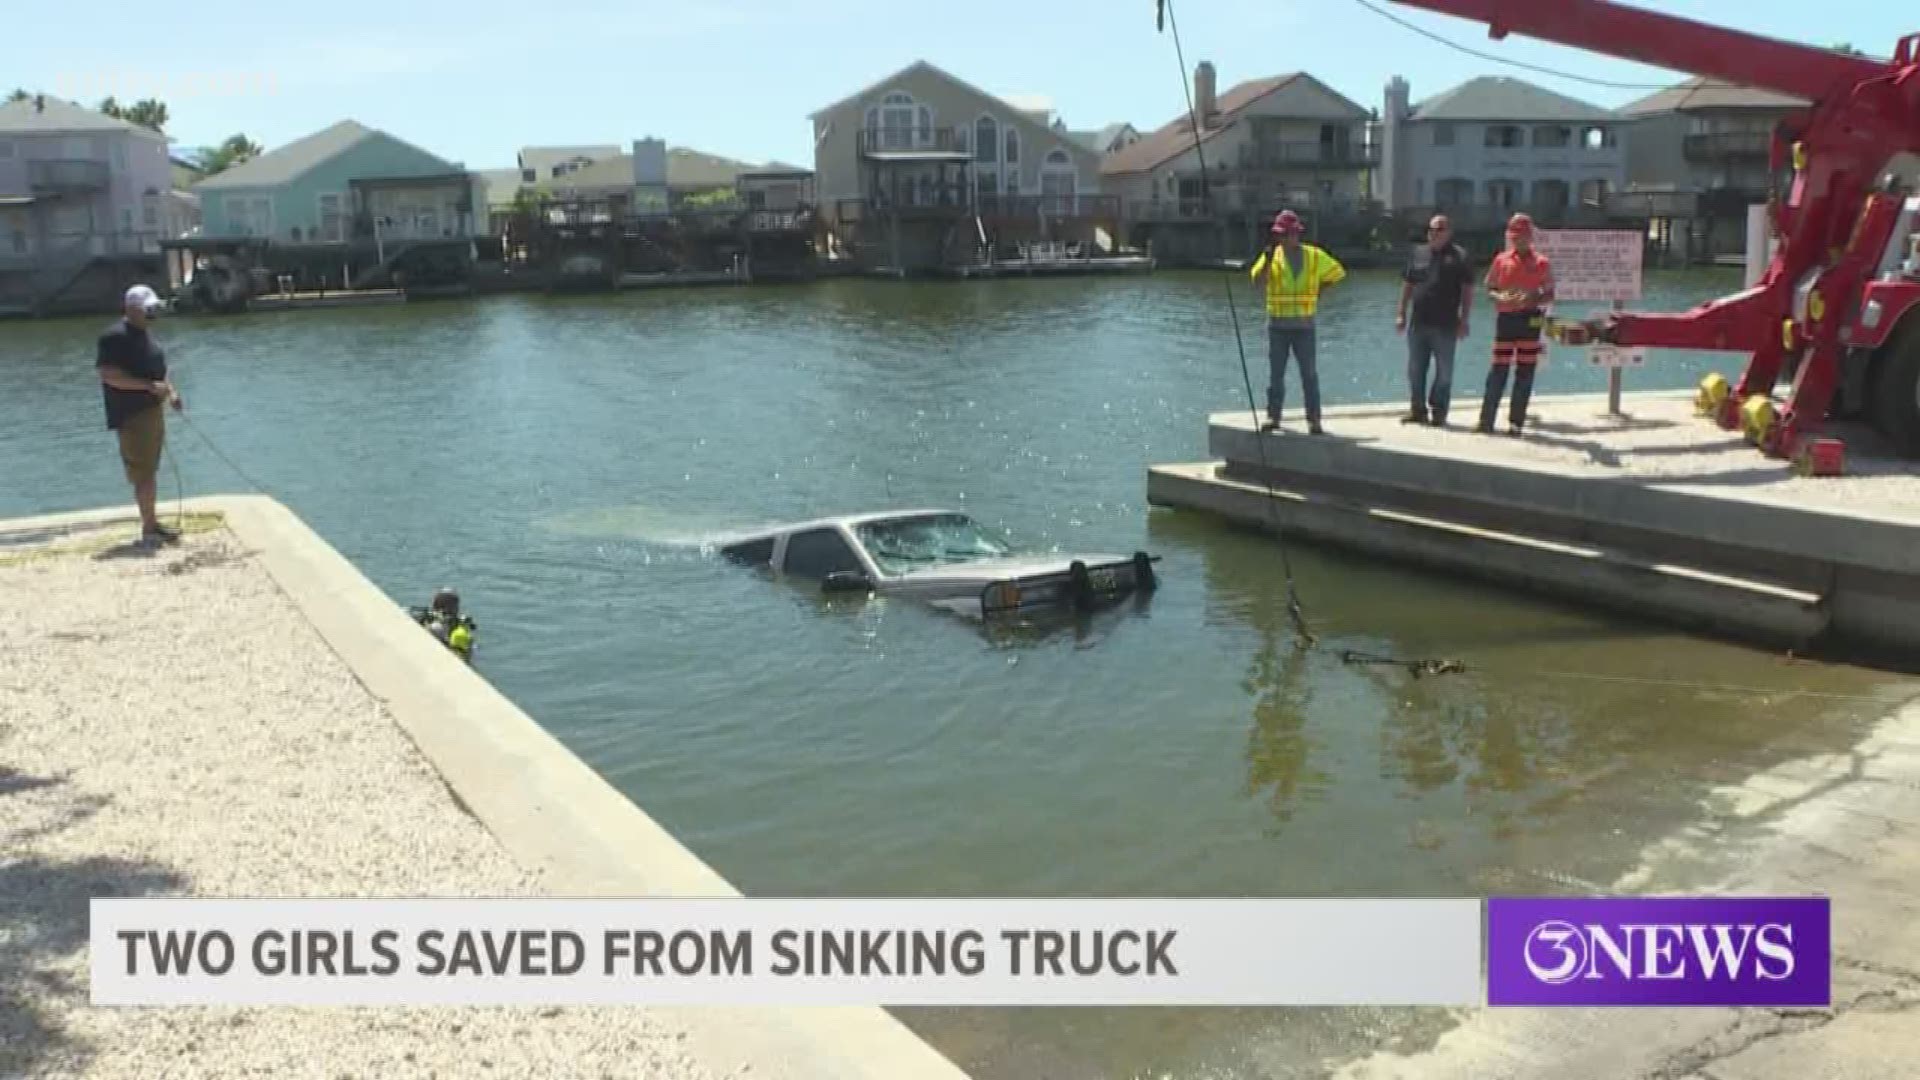 Emergency crews were called to a boat ramp at Whitecap Boulevard and Cartagena just after 11 a.m. Monday after a truck was pulled into the water with two children inside.